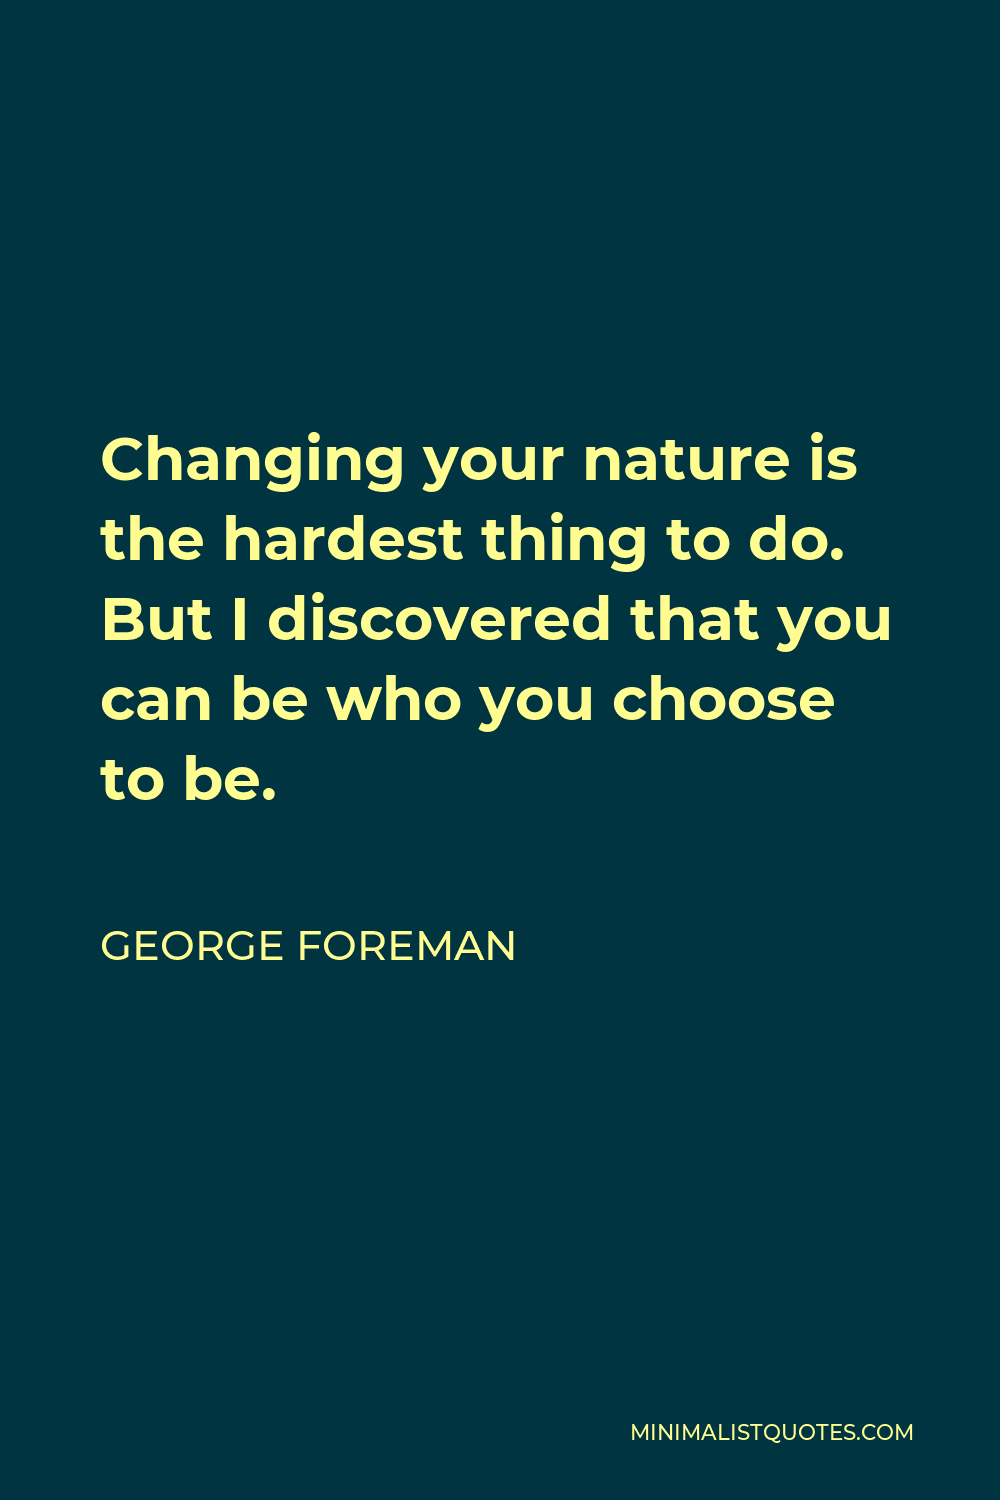 George Foreman Quote - Changing your nature is the hardest thing to do. But I discovered that you can be who you choose to be.